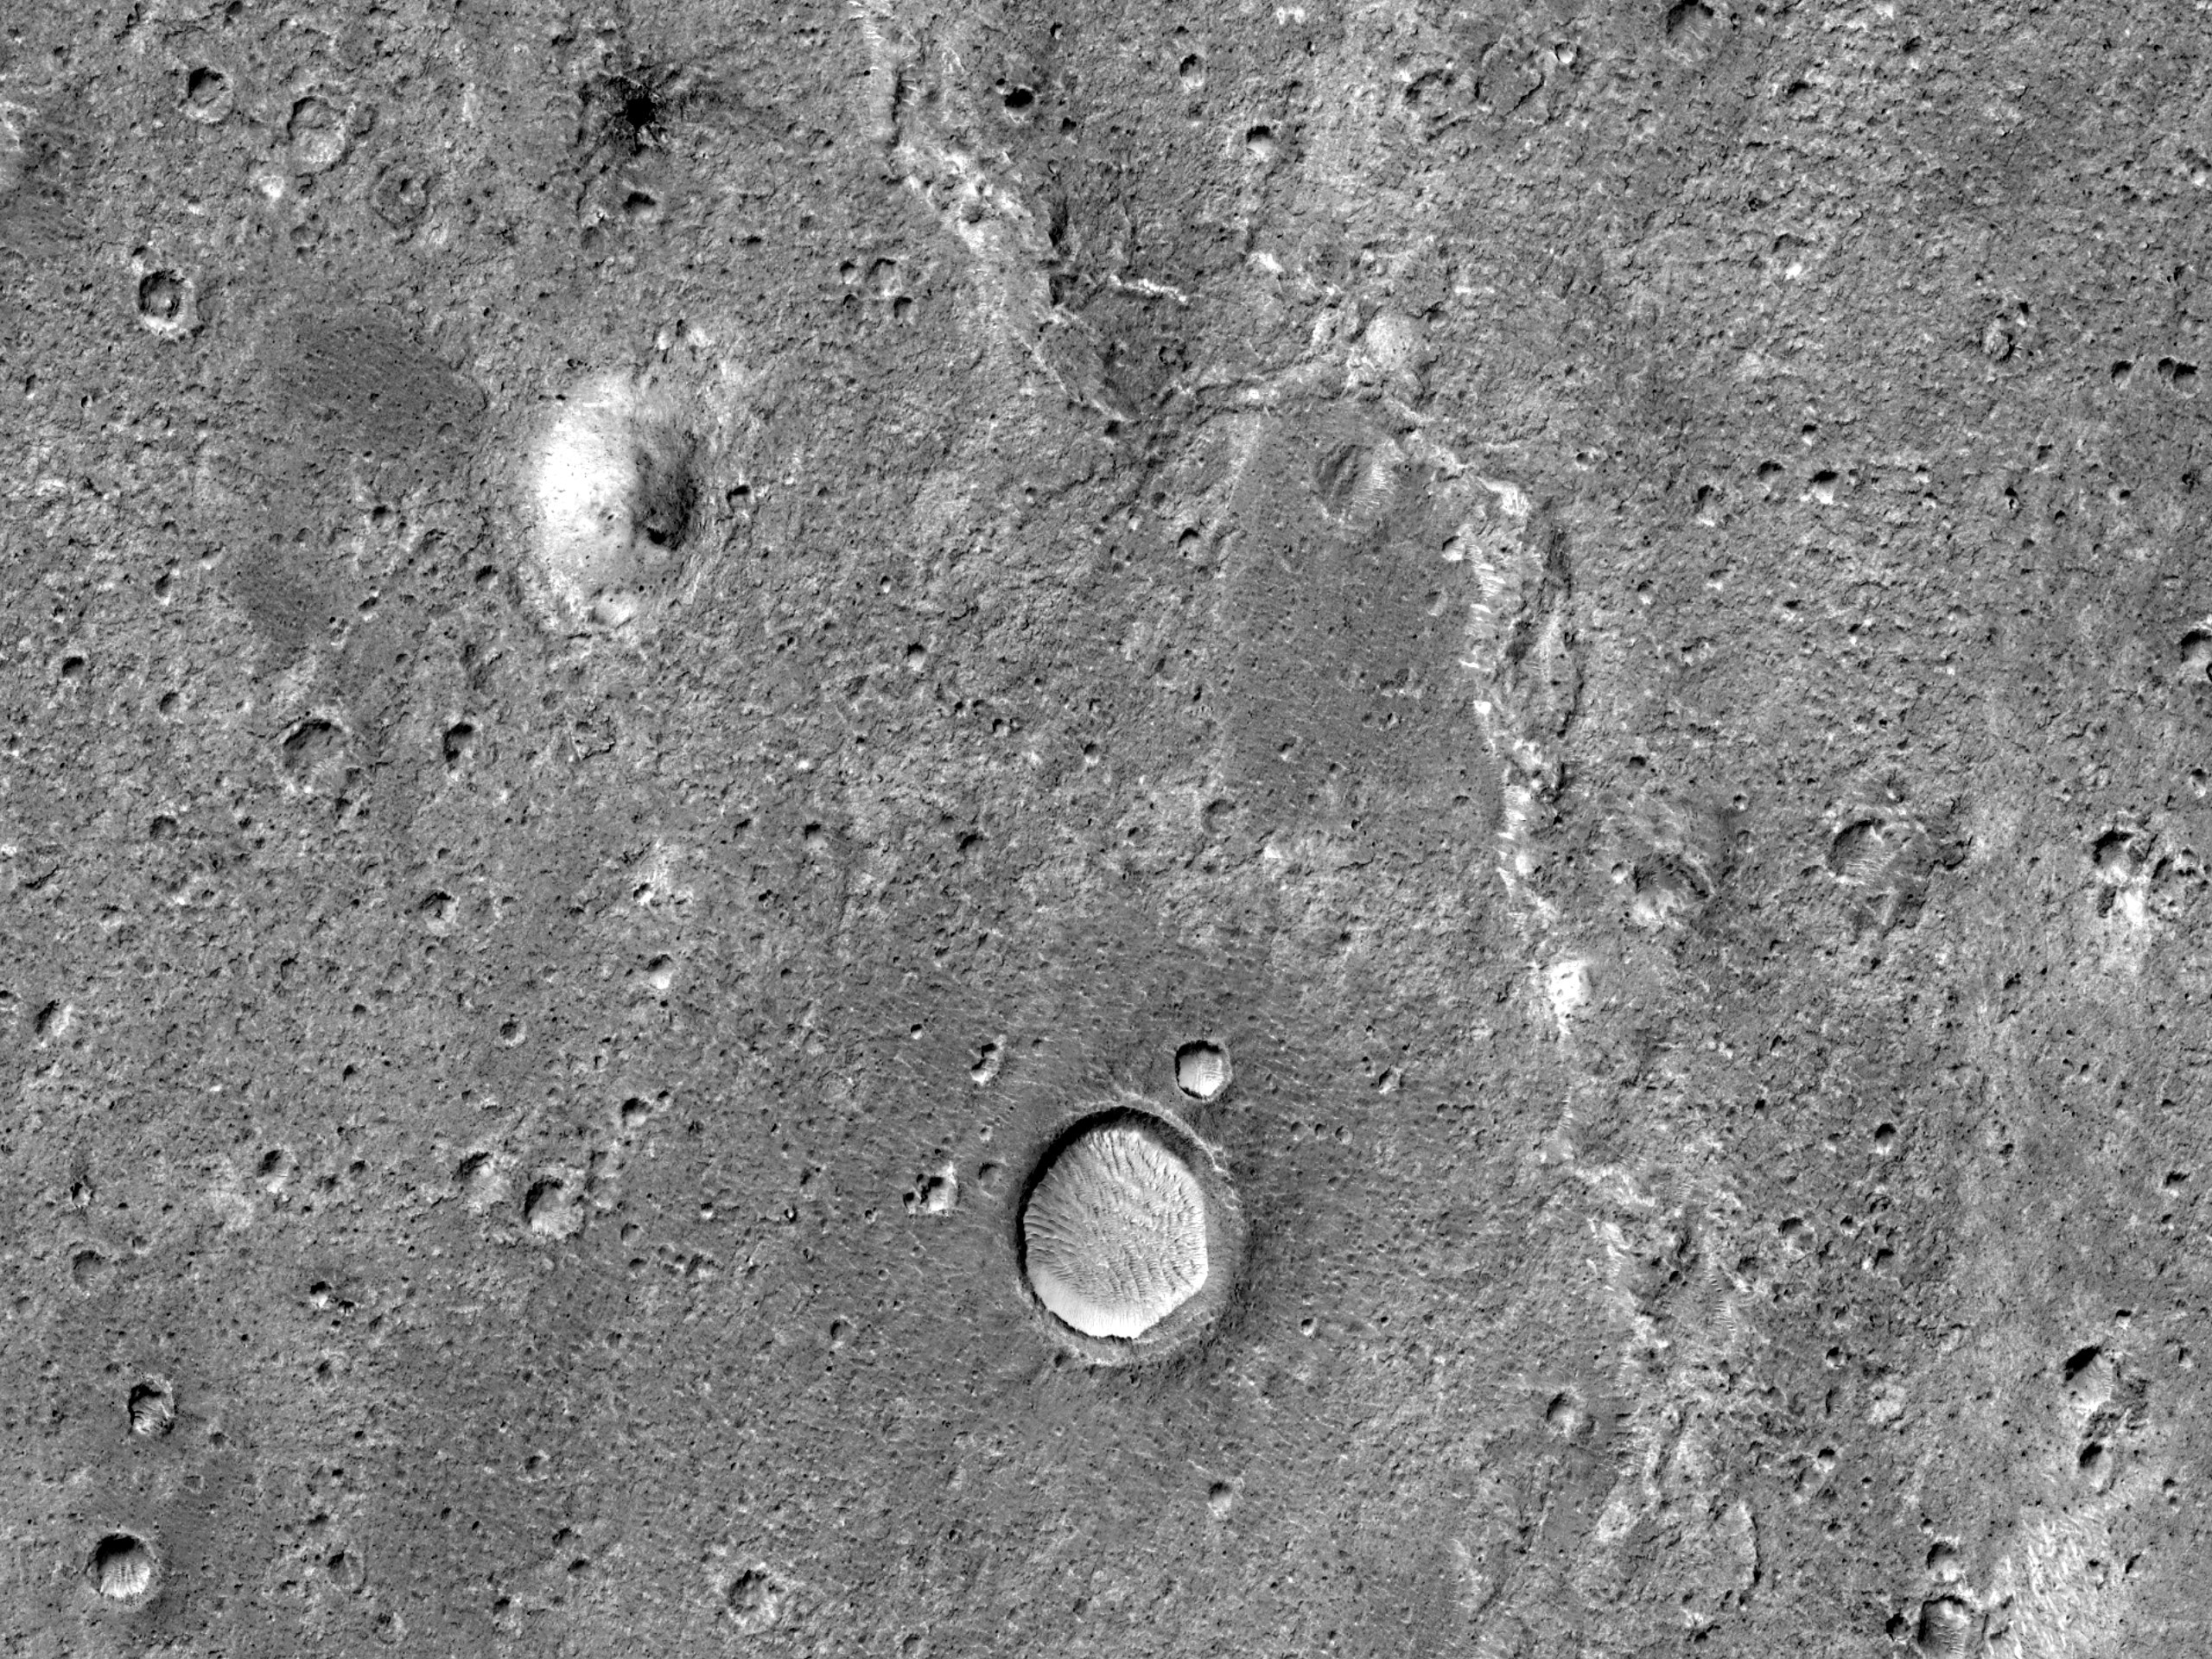 Candidate Landing Site for 2020 Mission in Hypanis Valles Delta